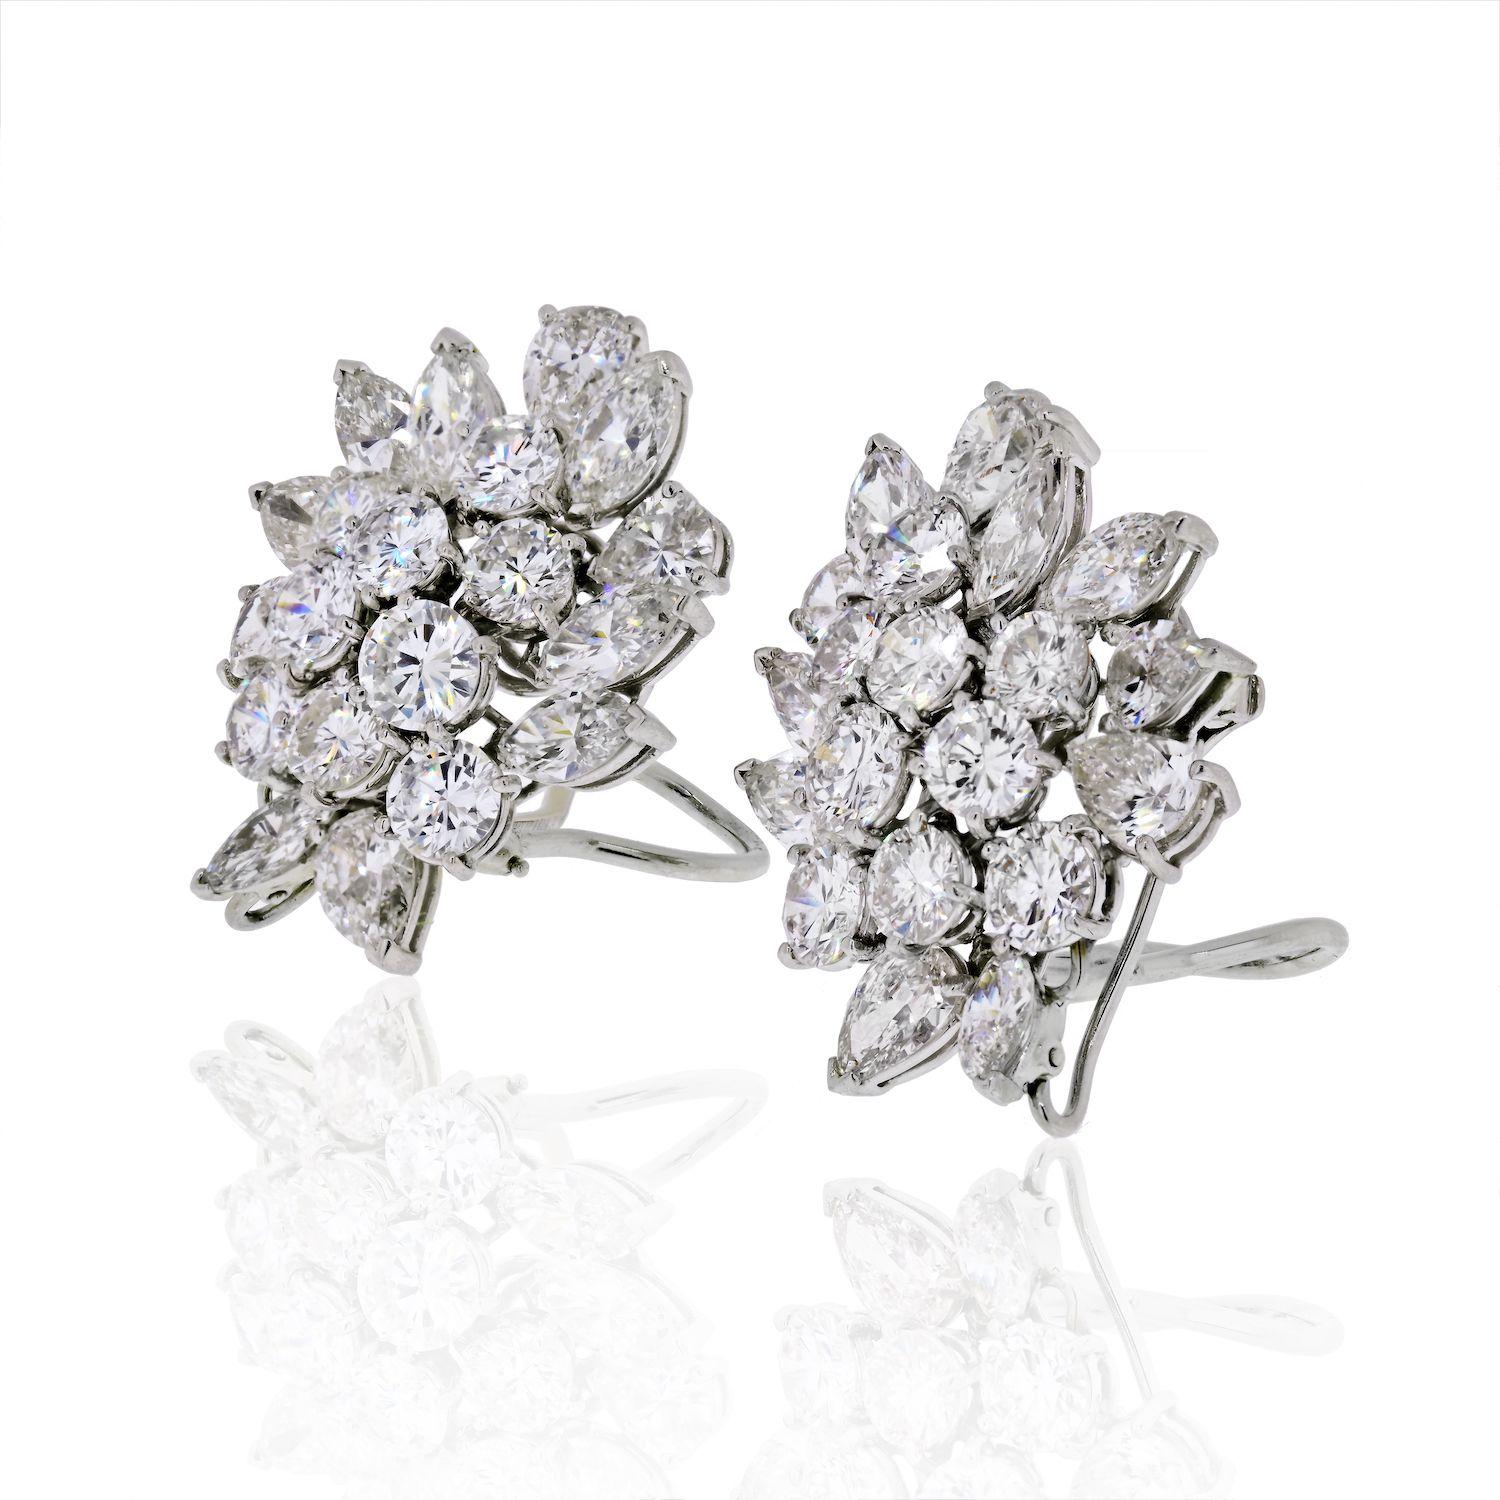 This vintage Round, Marquise, Pear Cut Cluster Statement earrings are created with best quality sparkling diamonds. This is a must have earring for any of your special events. These earrings will transition nicely from day to the night events.
A